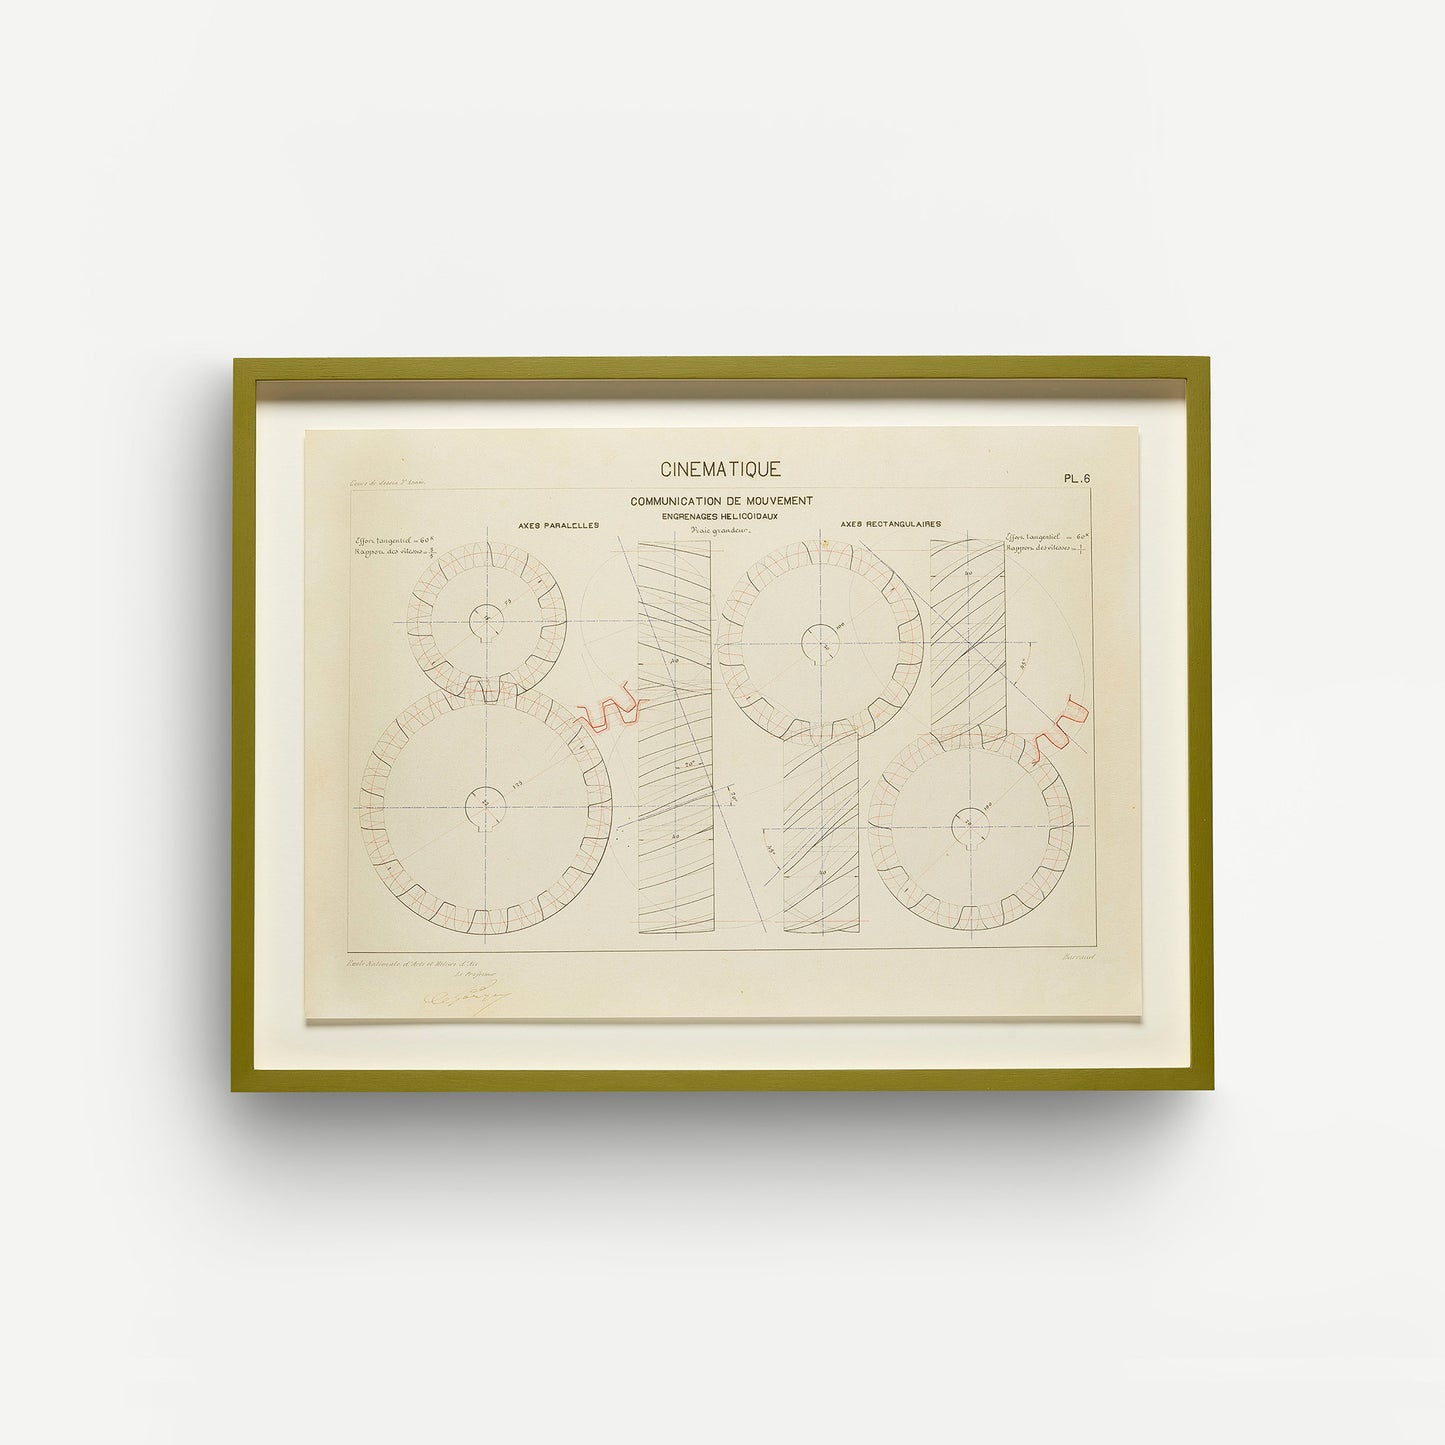 Print by G. Barraud of a technical drawing, float-mounted and framed in hand-painted olive green. Front aspect. 